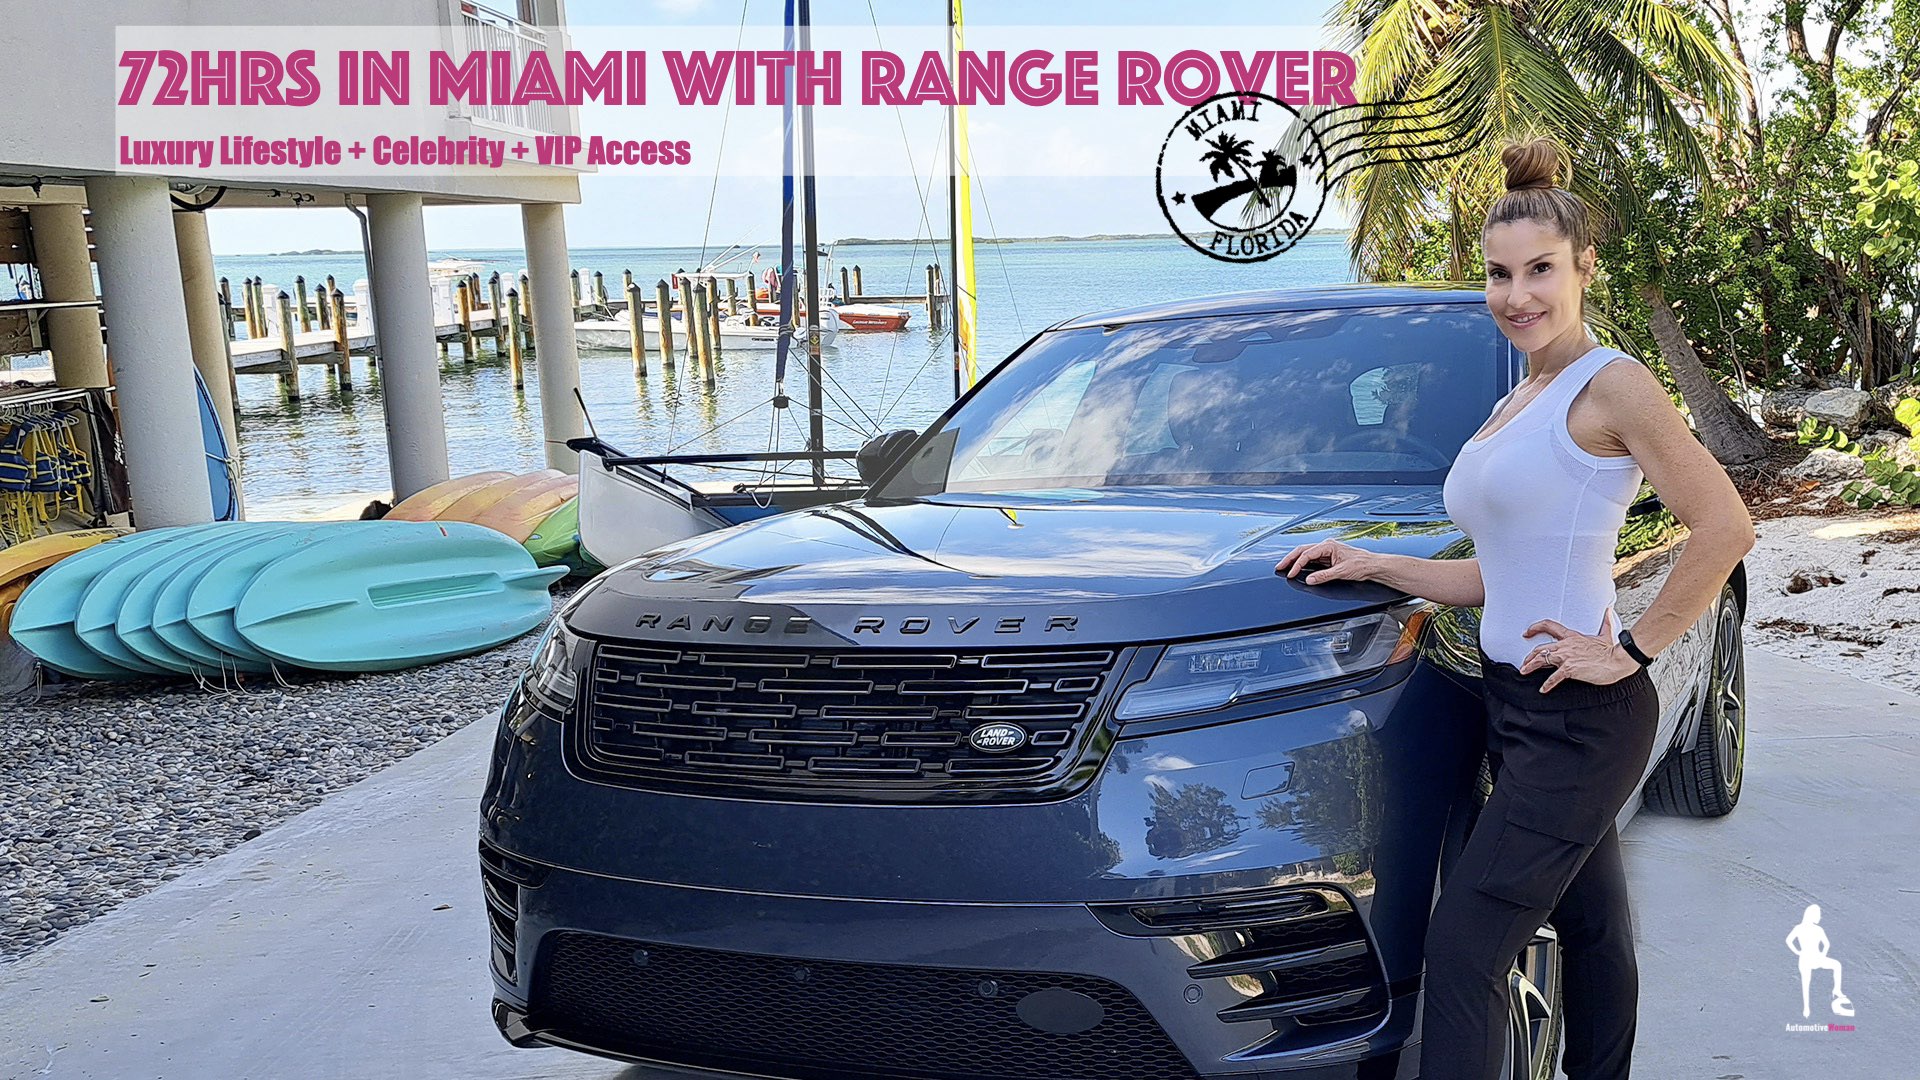 Range-Rover-72hrs-in-Miami-YouTube-Cover-with-Postmark